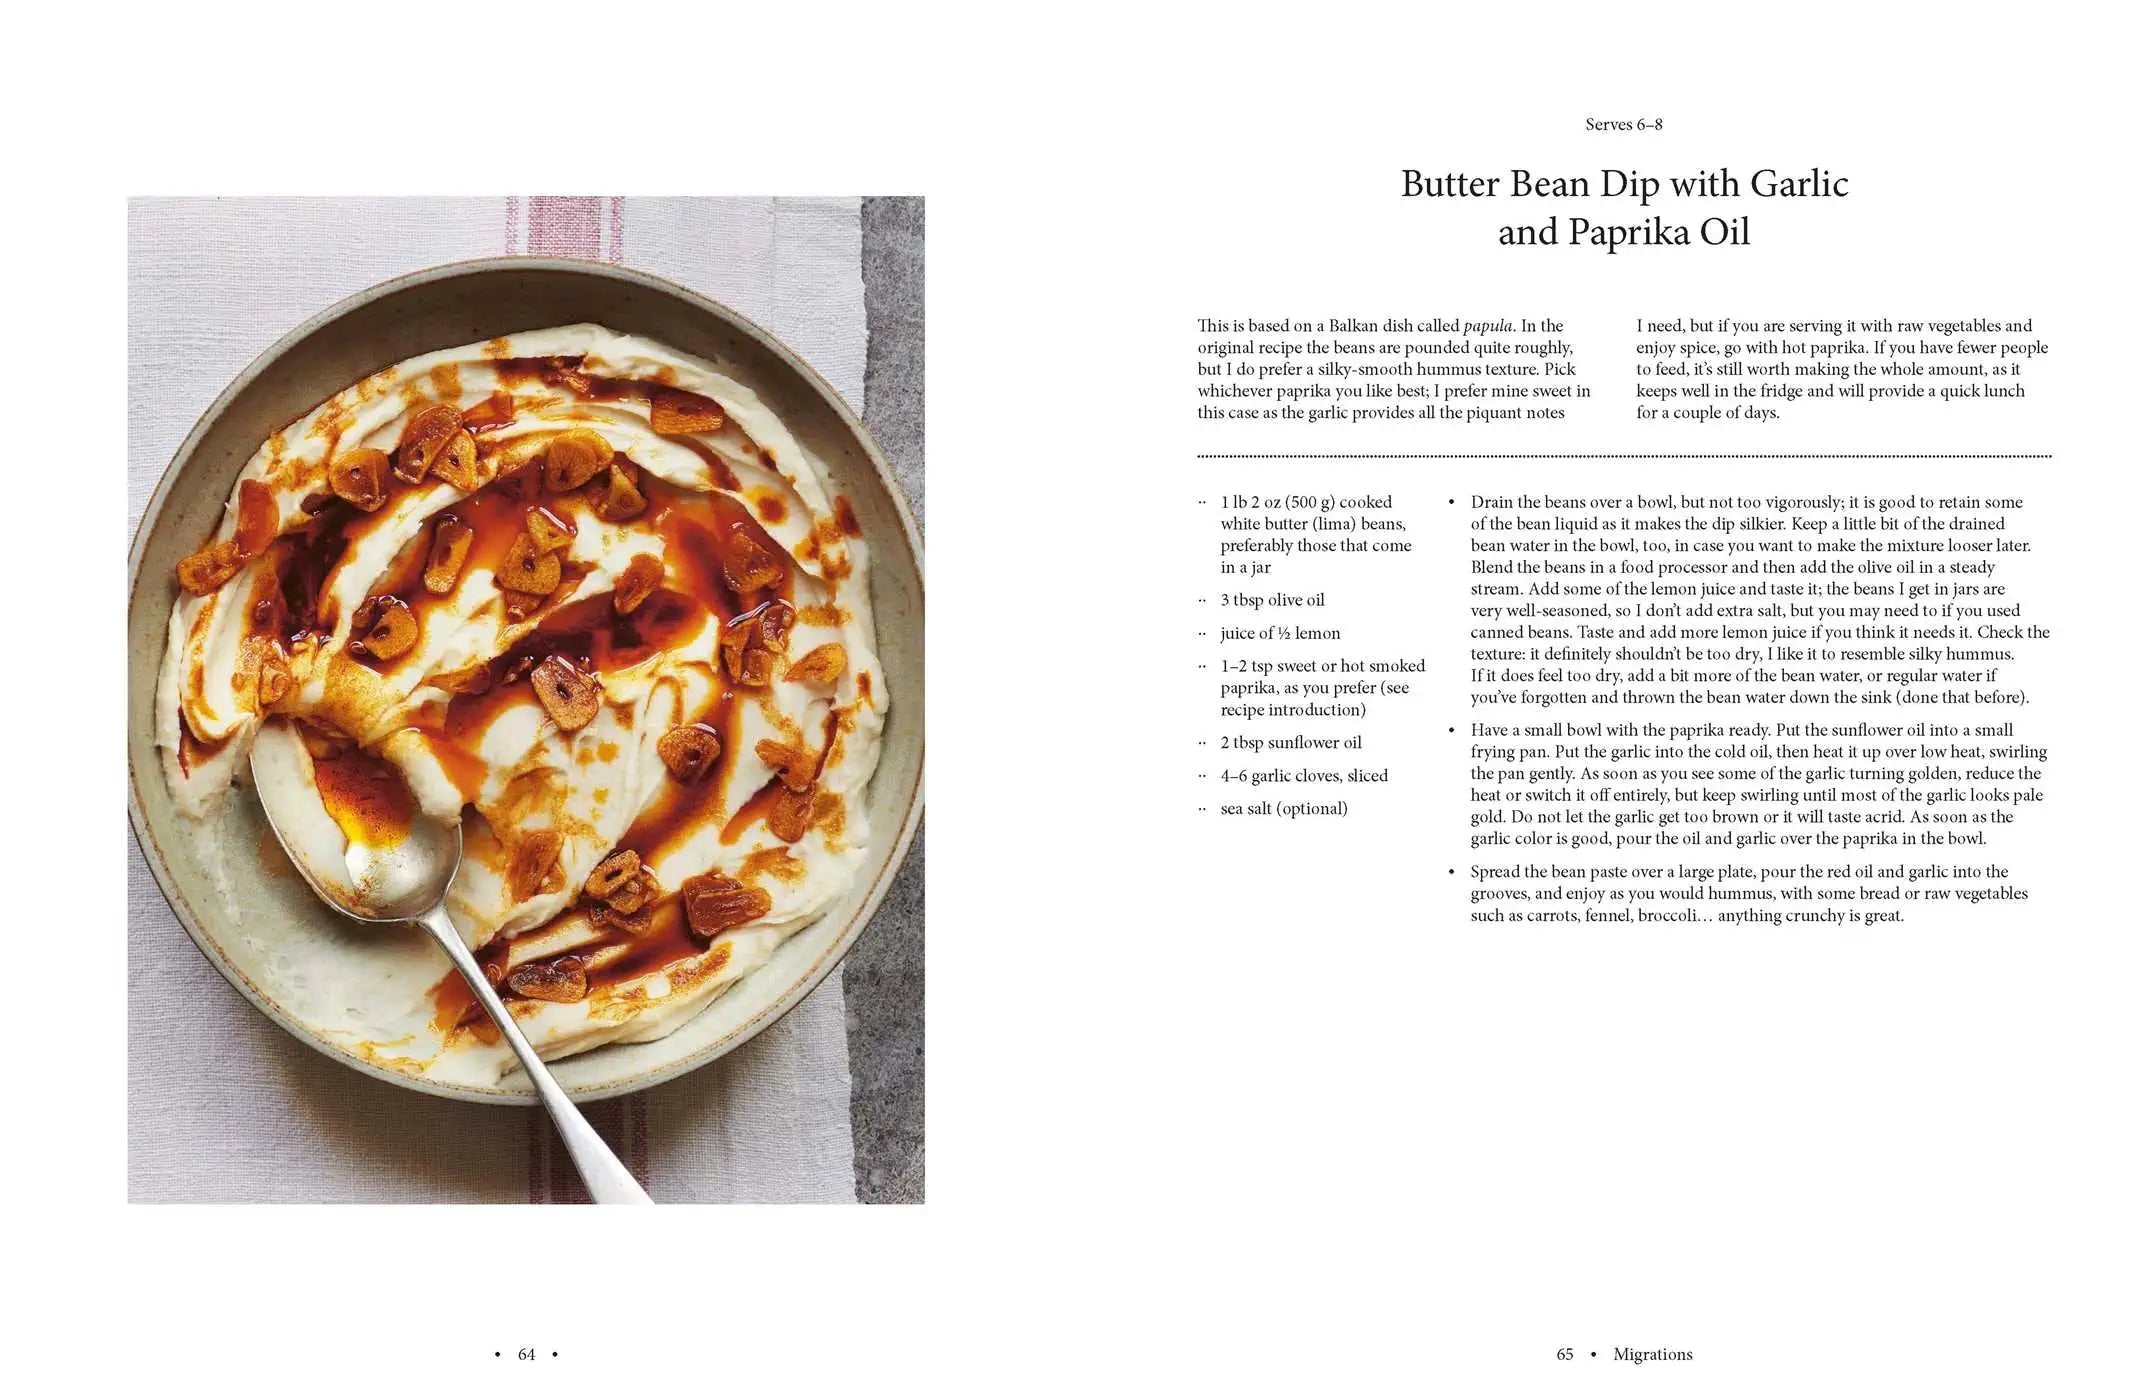 Home Food: Recipes to Comfort and Connect, U.S. Edition (Olia Hercules)